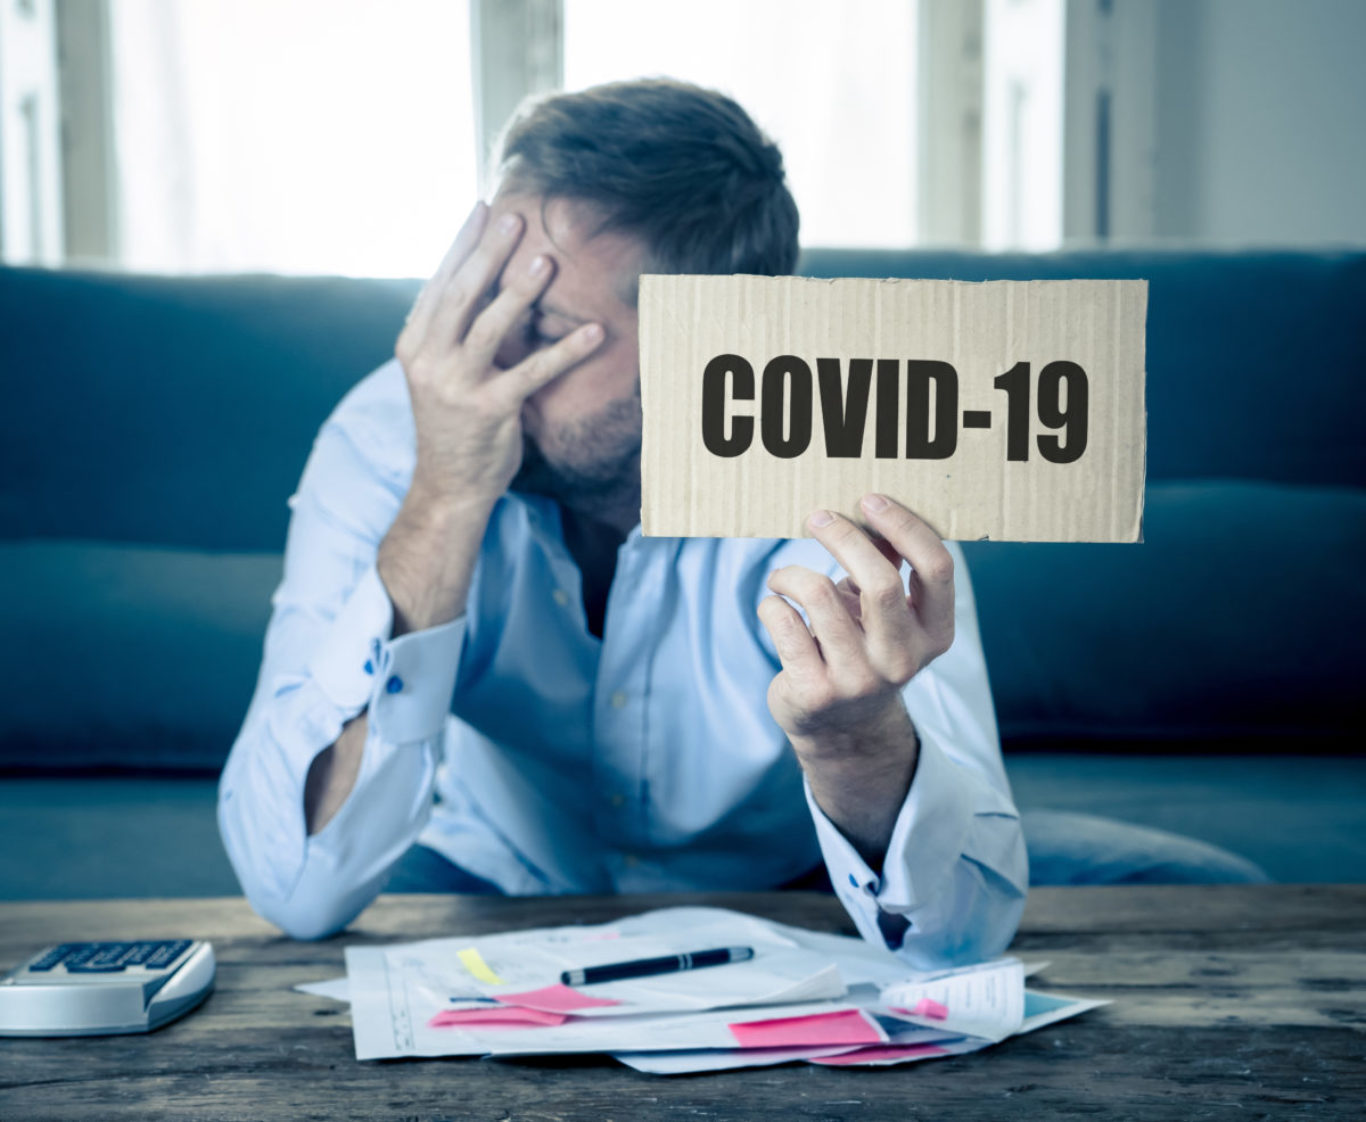 COVID-19 Global economic Recession. Depressed man desperate not able to pay rent and expenses. Worker affected by global economic recession amid to Coronavirus job losses and financial impact.